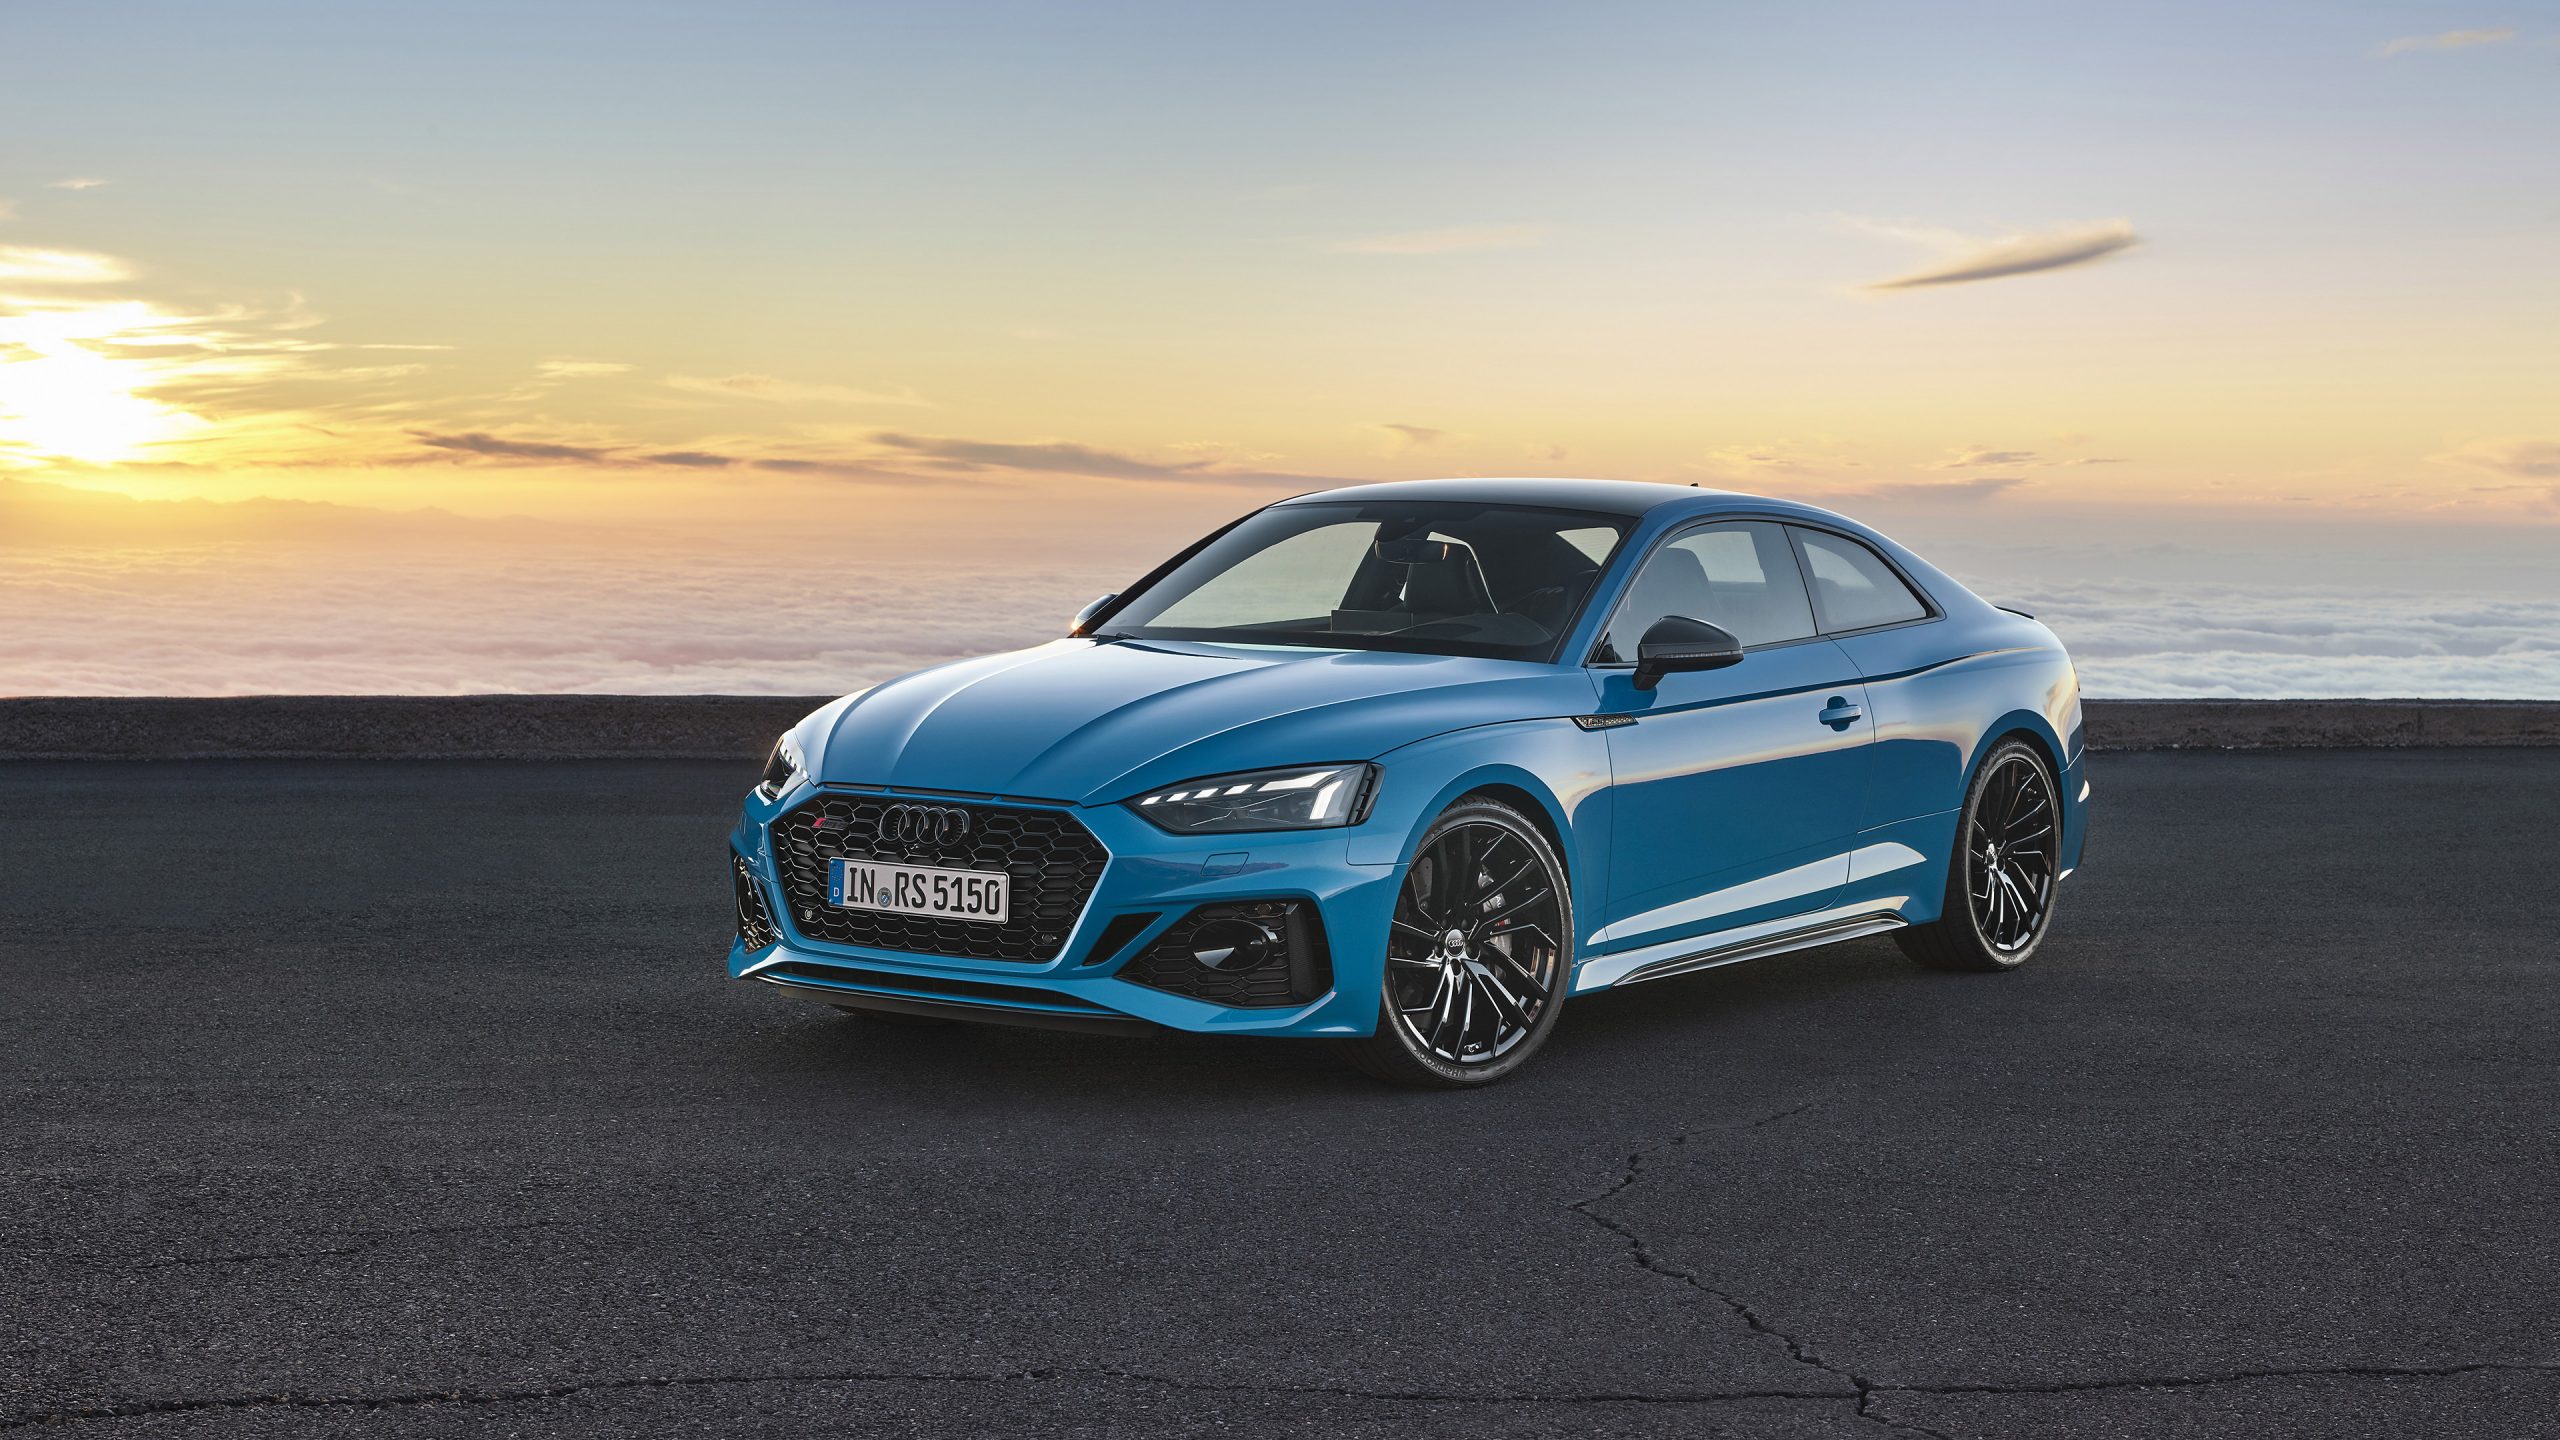 2020 Audi RS5 Coupe Wallpapers | SuperCars.net